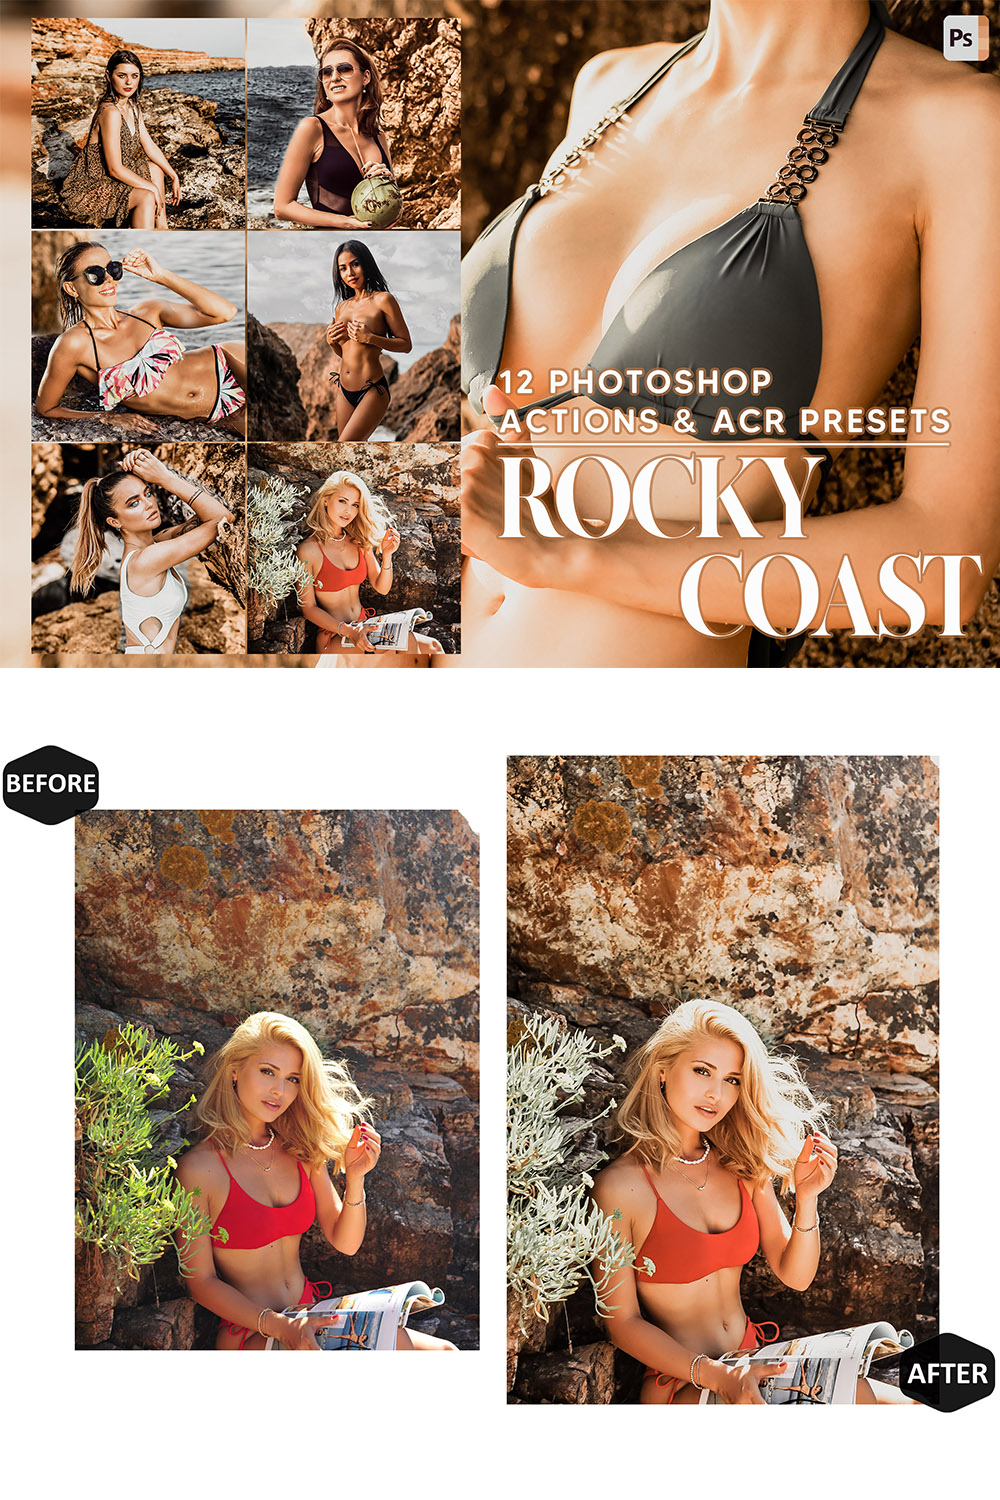 12 Photoshop Actions, Rocky Coast Ps Action, Tanned Skin ACR Preset, Summer Ps Filter, Portrait And Lifestyle Theme For Instagram, Blogger pinterest preview image.